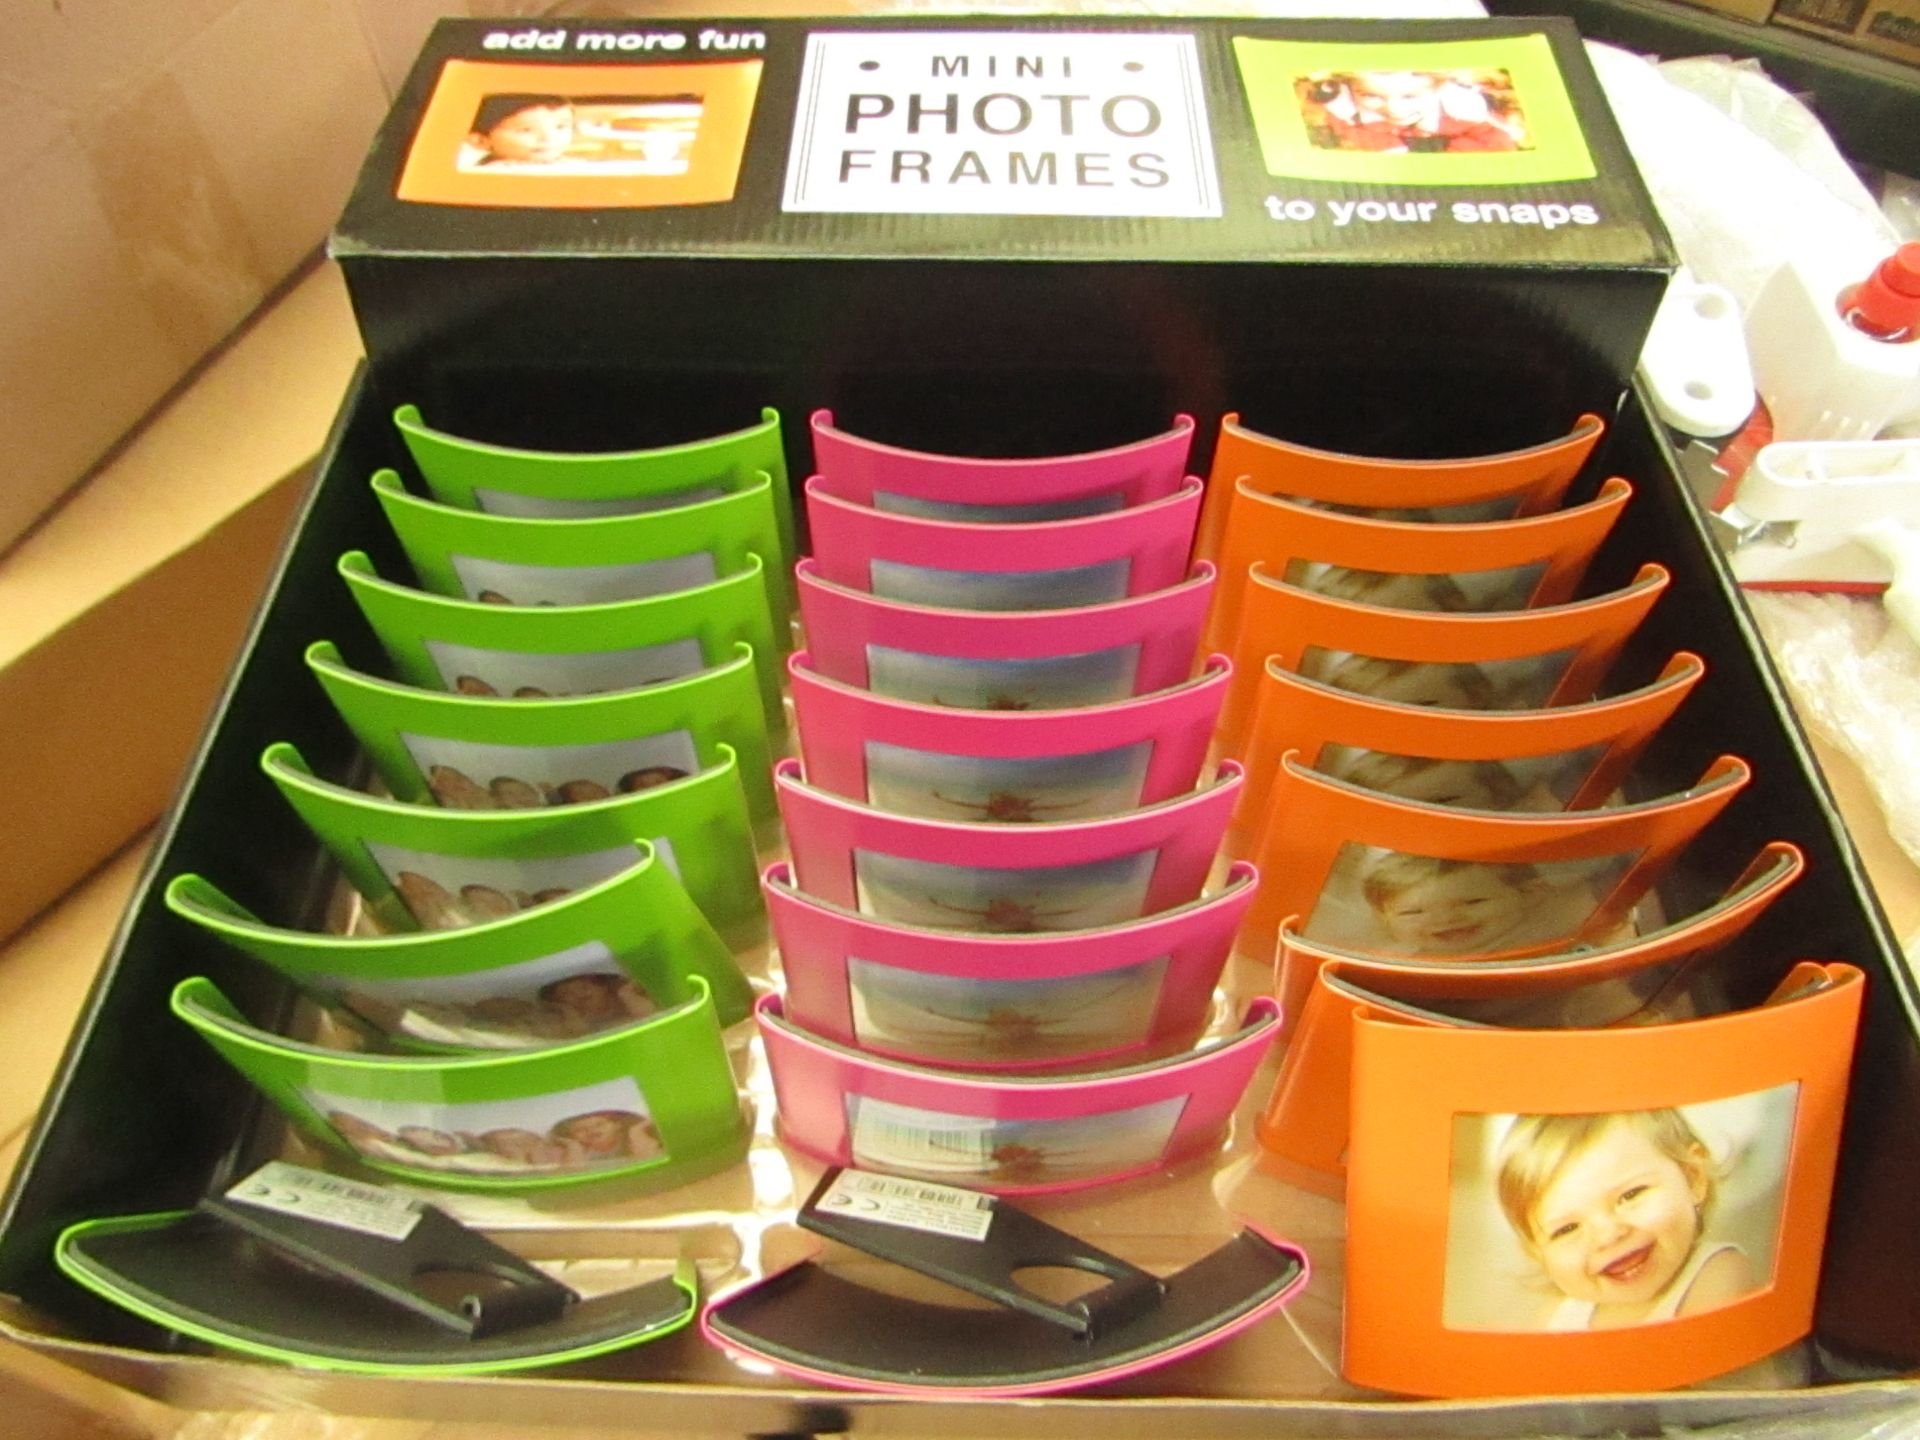 Box of 24 Mini Photo Frames. Comes in a retail Display Box - New & Boxed.